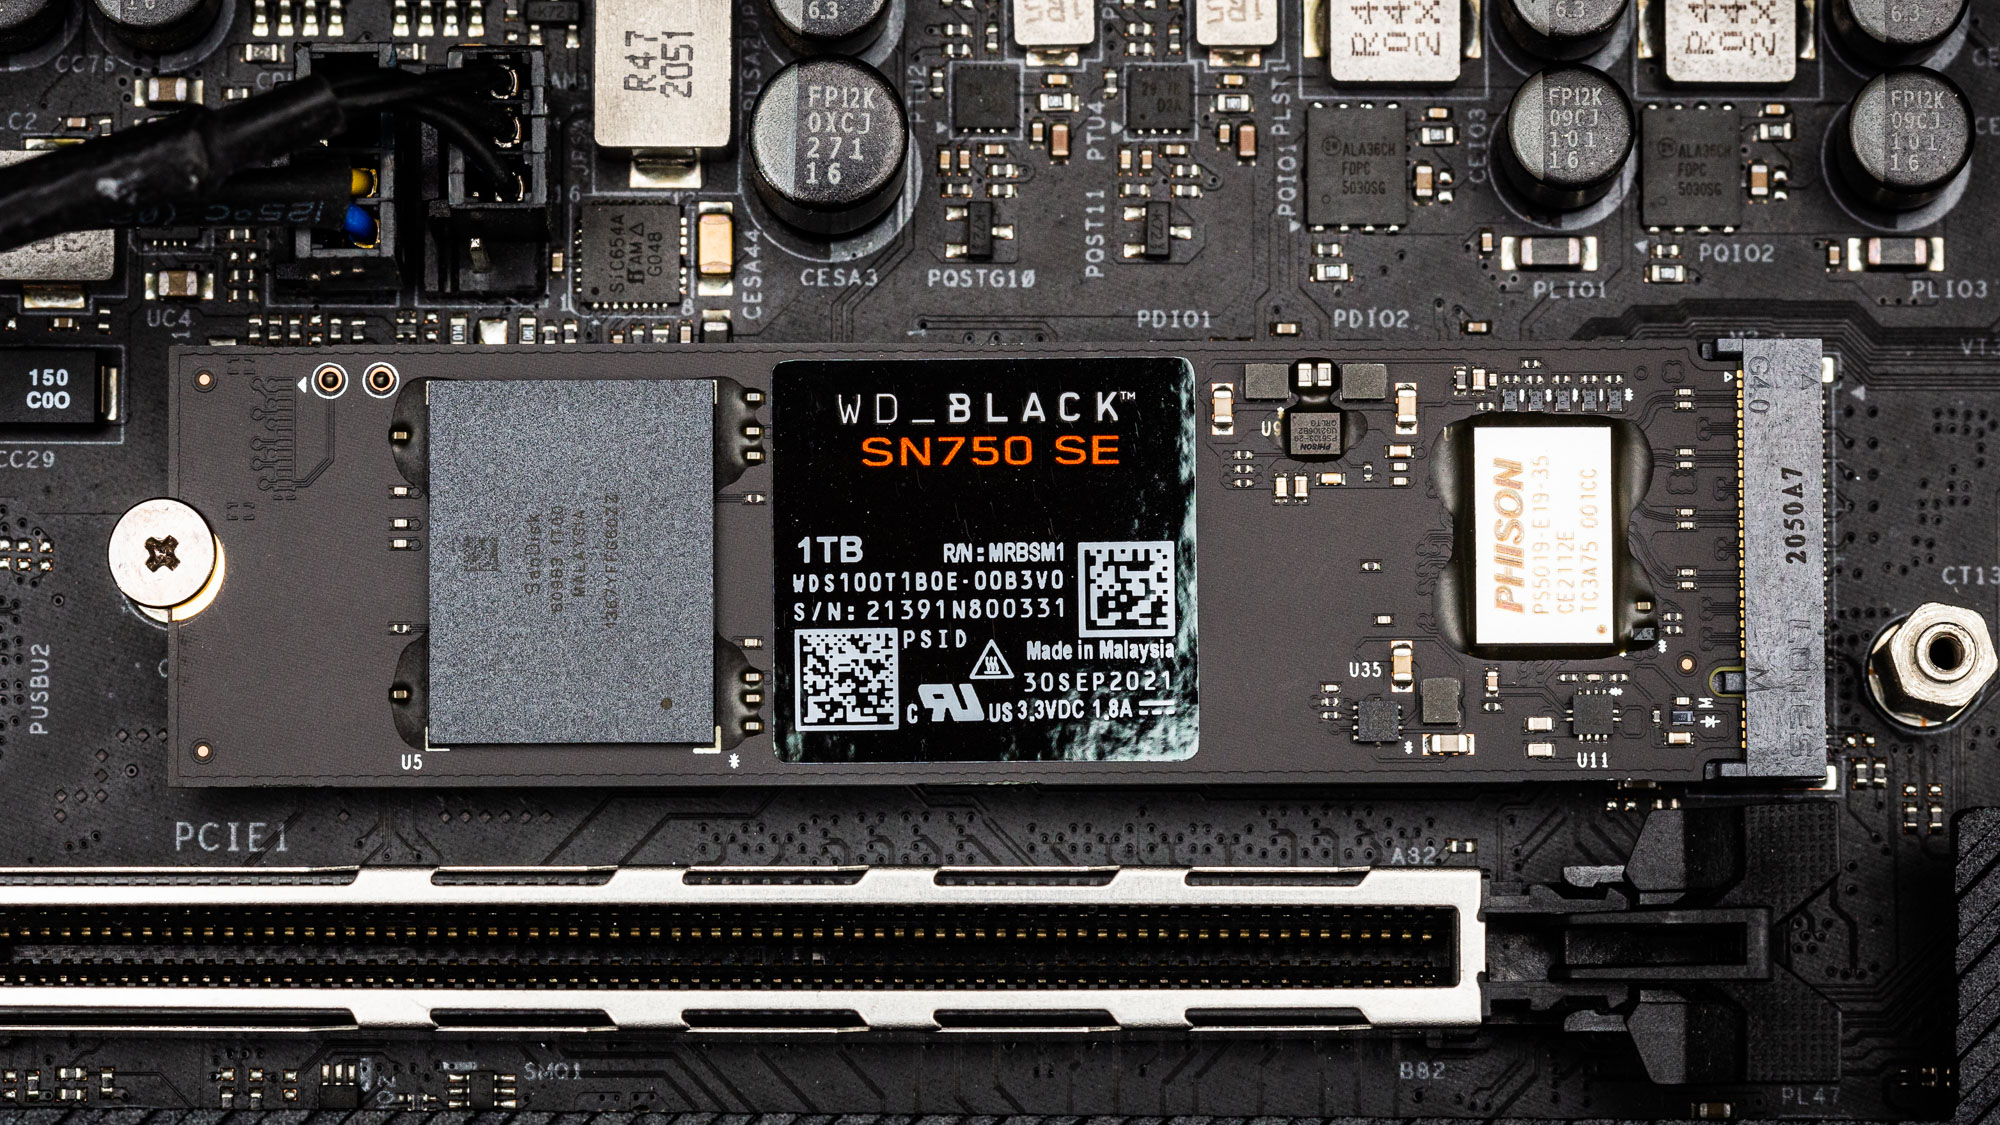 Wd Black Sn750 Se Ssd Review Cost Effective Storage For Gamers Tom S Hardware